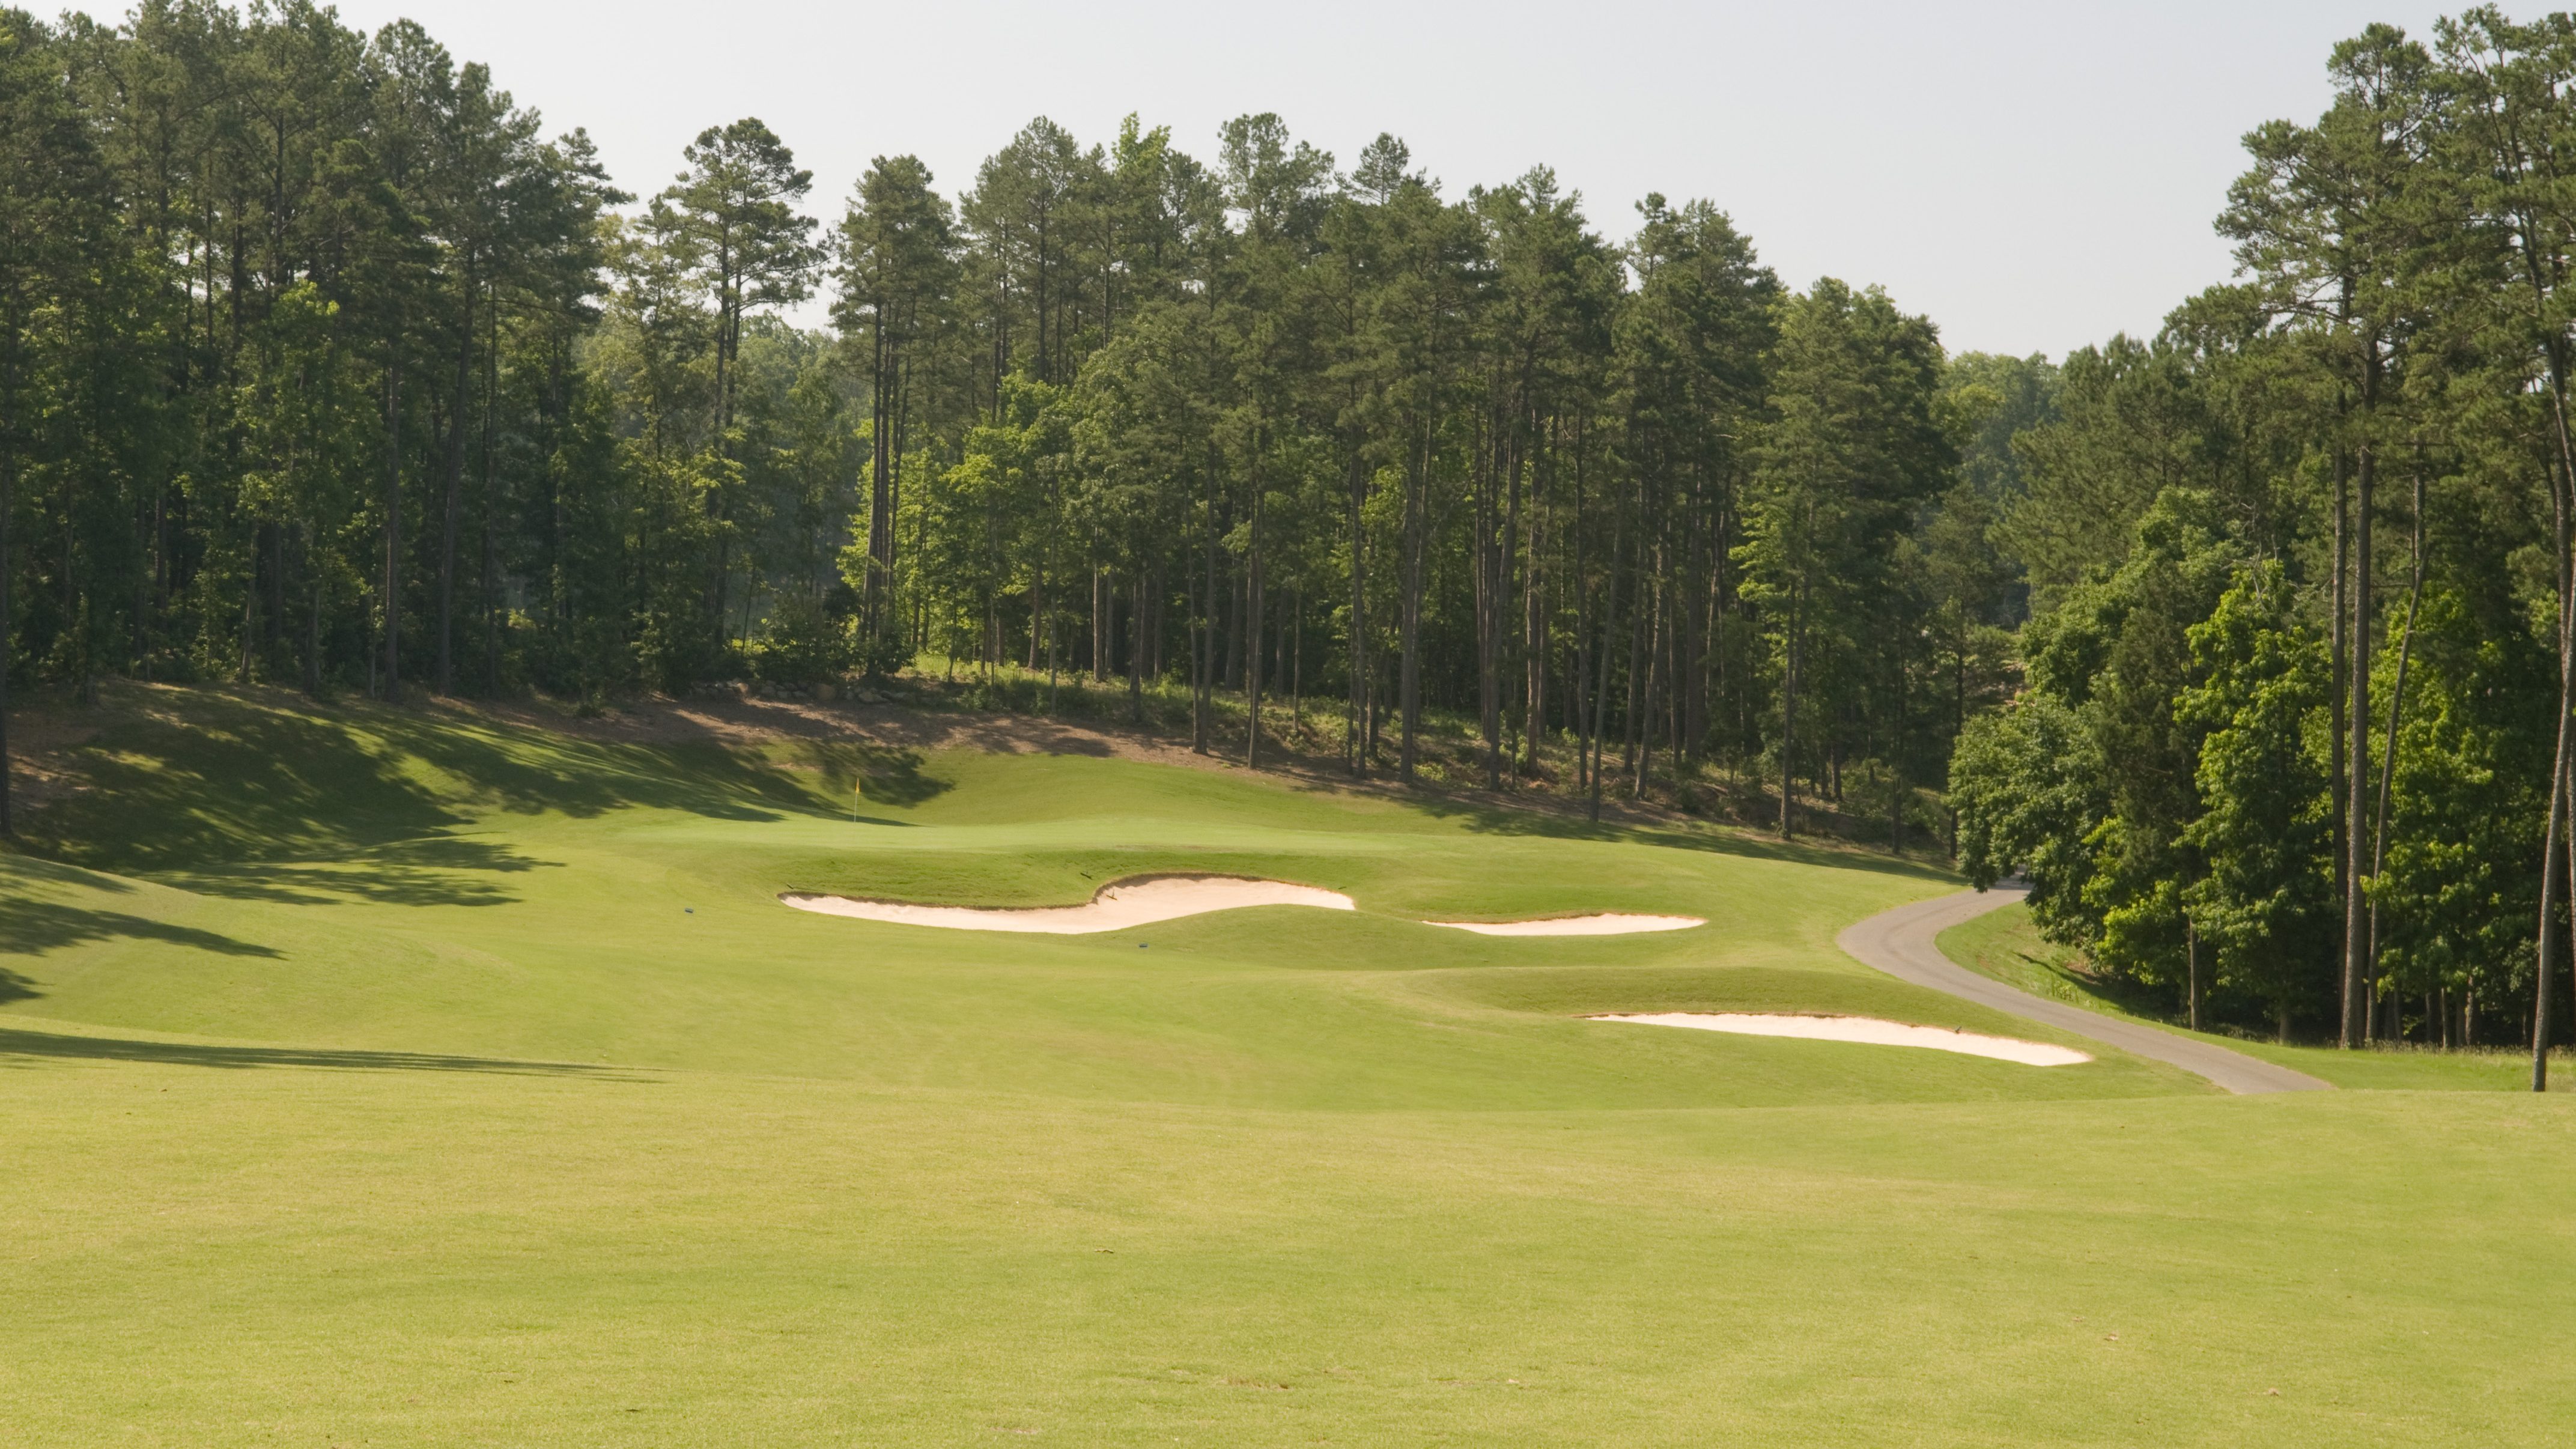 fairway with bunker down surrounded by trees and bunkers